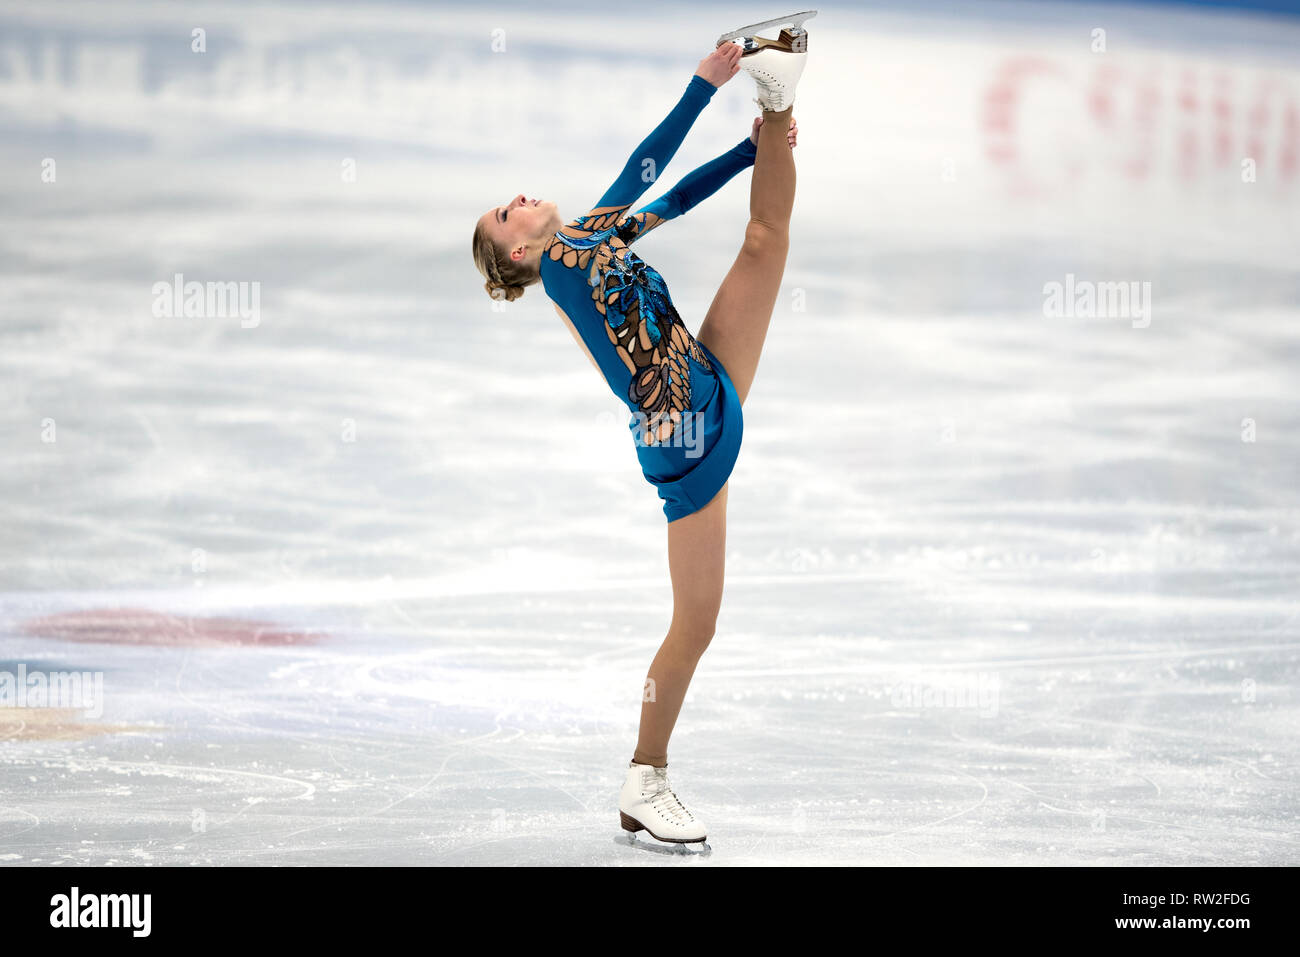 Maria Sotskova from Russia during 2017 world figure skating championships Stock Photo